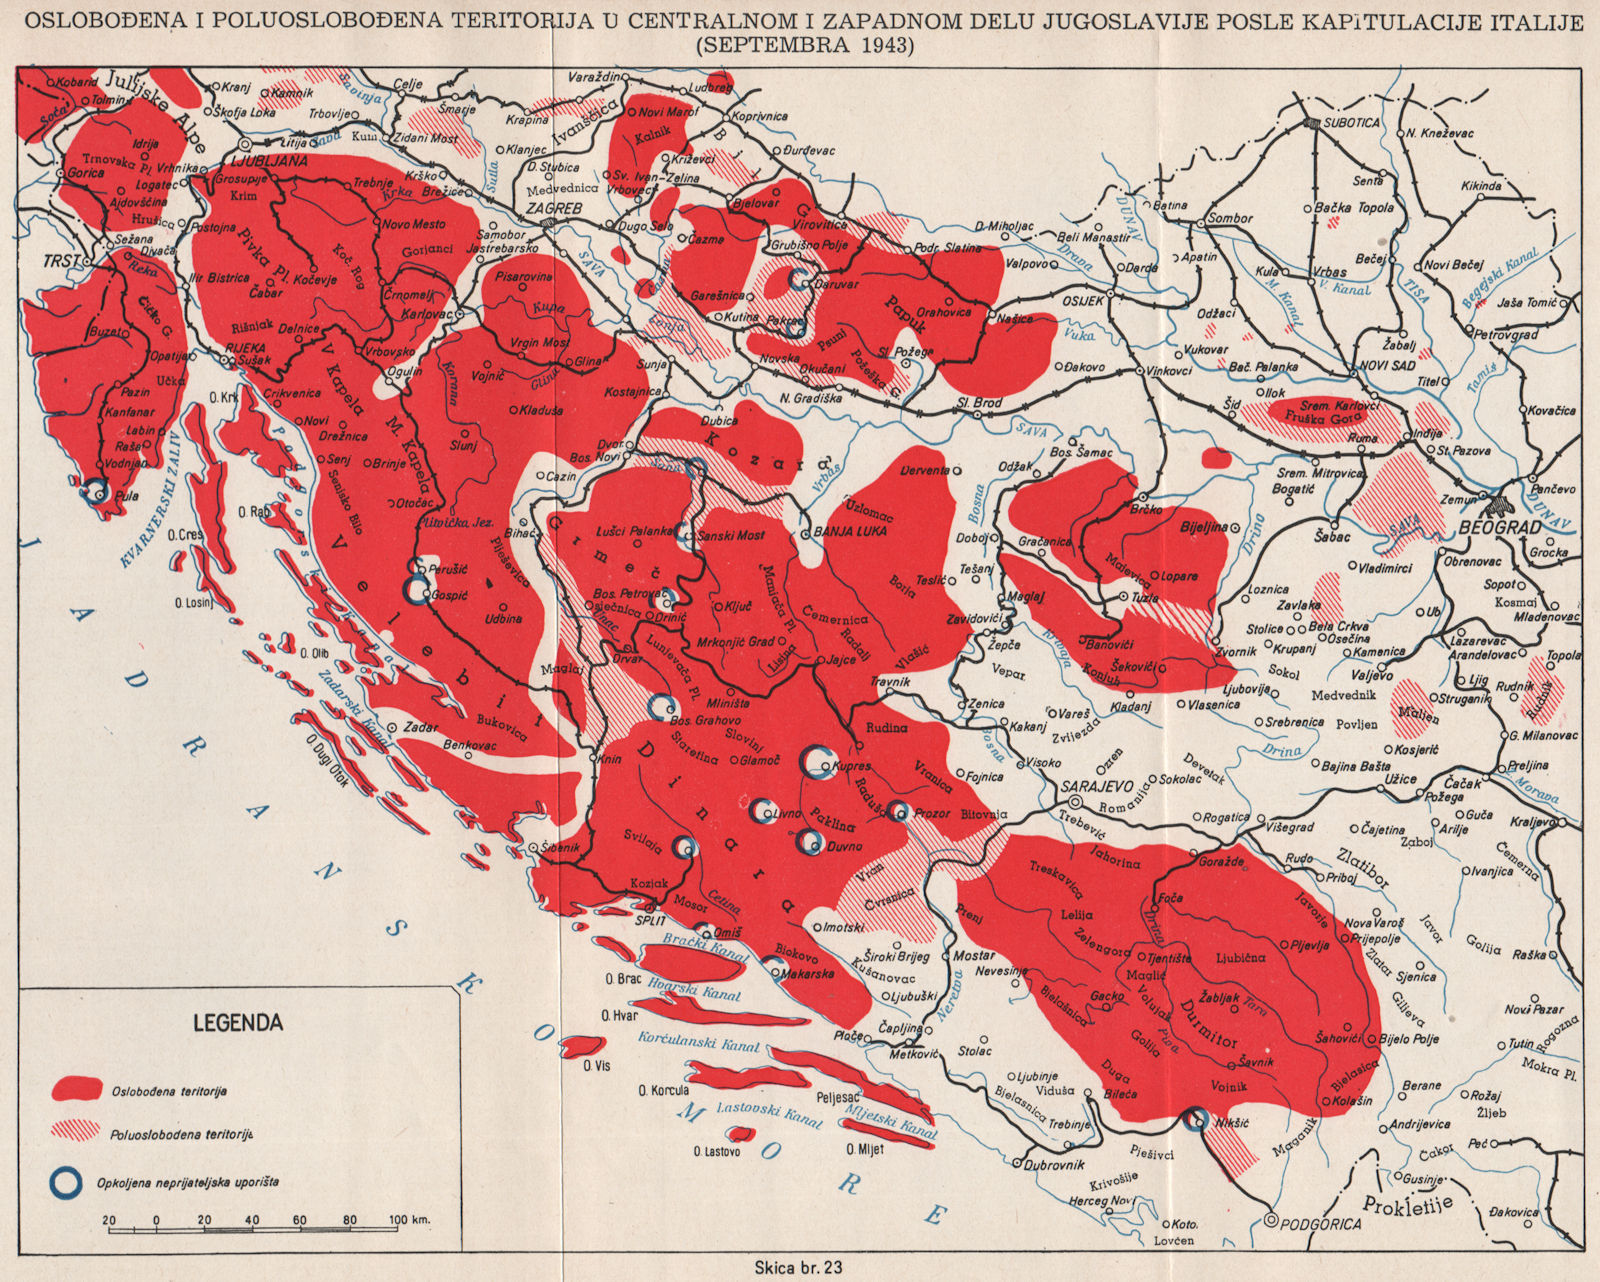 YUGOSLAVIA. Liberated territory after Italy's capitulation Sept 1943 1957 map